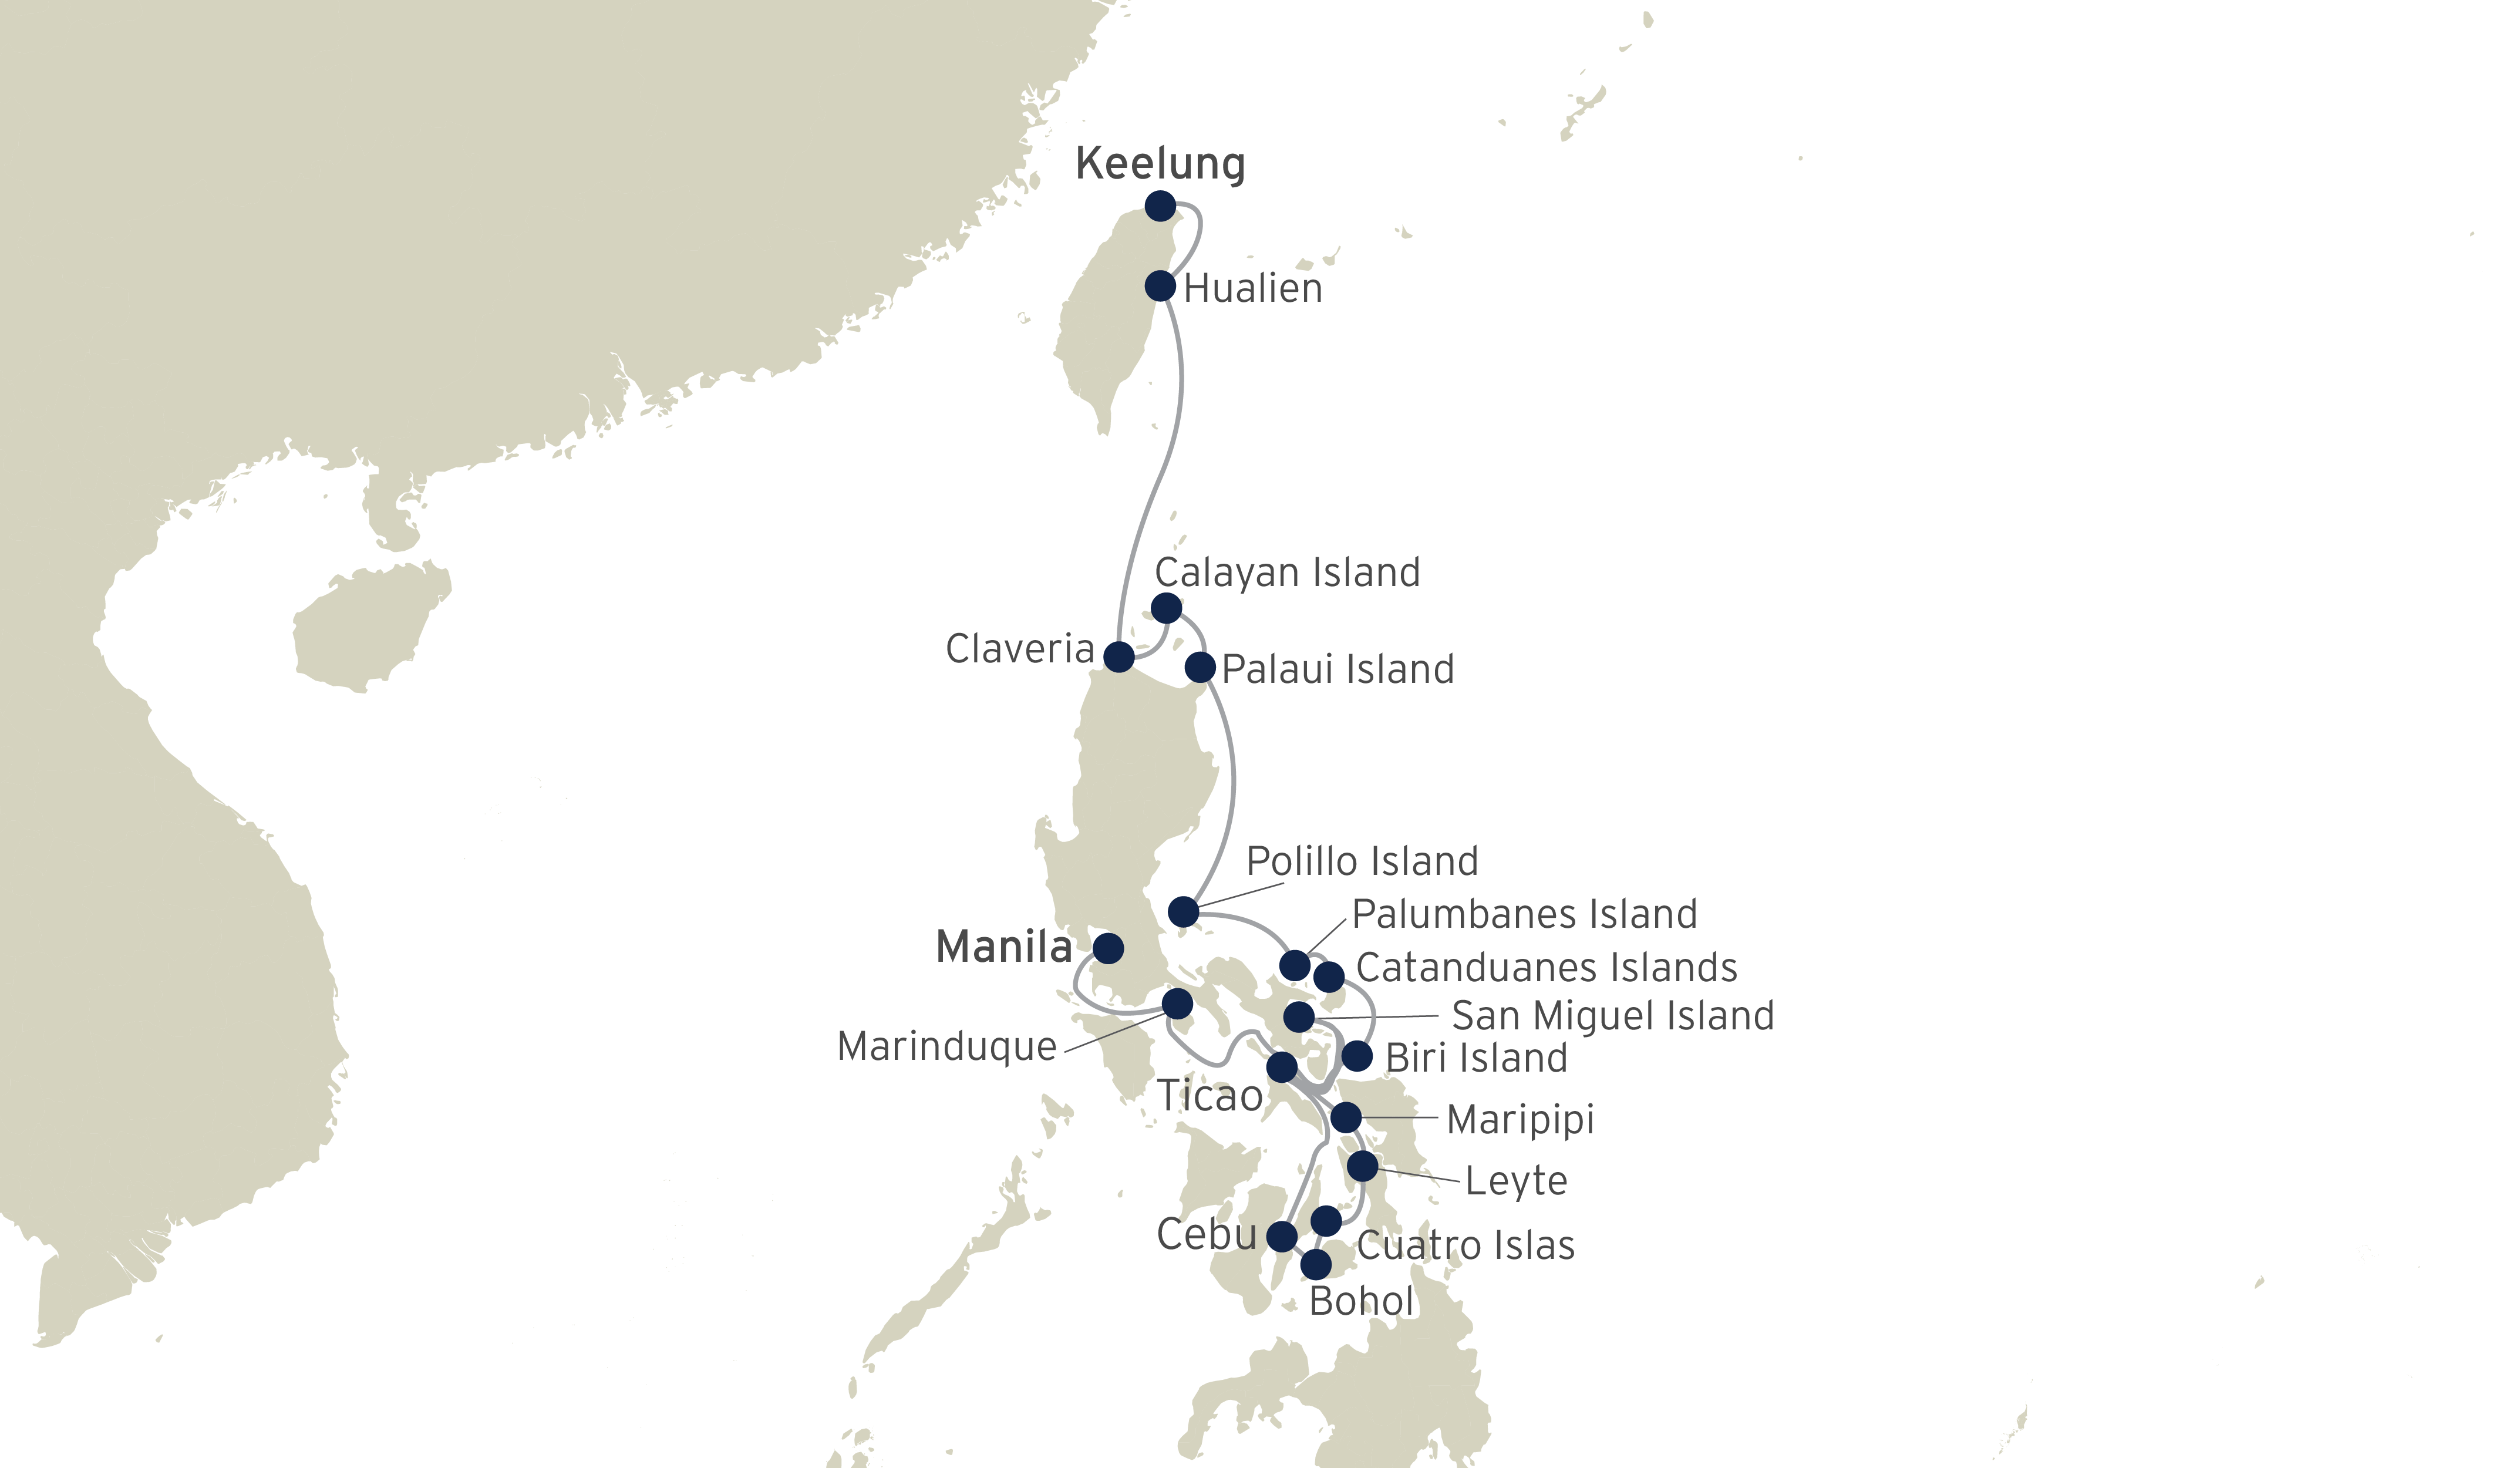 Island Trails of the Philippines - Keelung to Manila Map